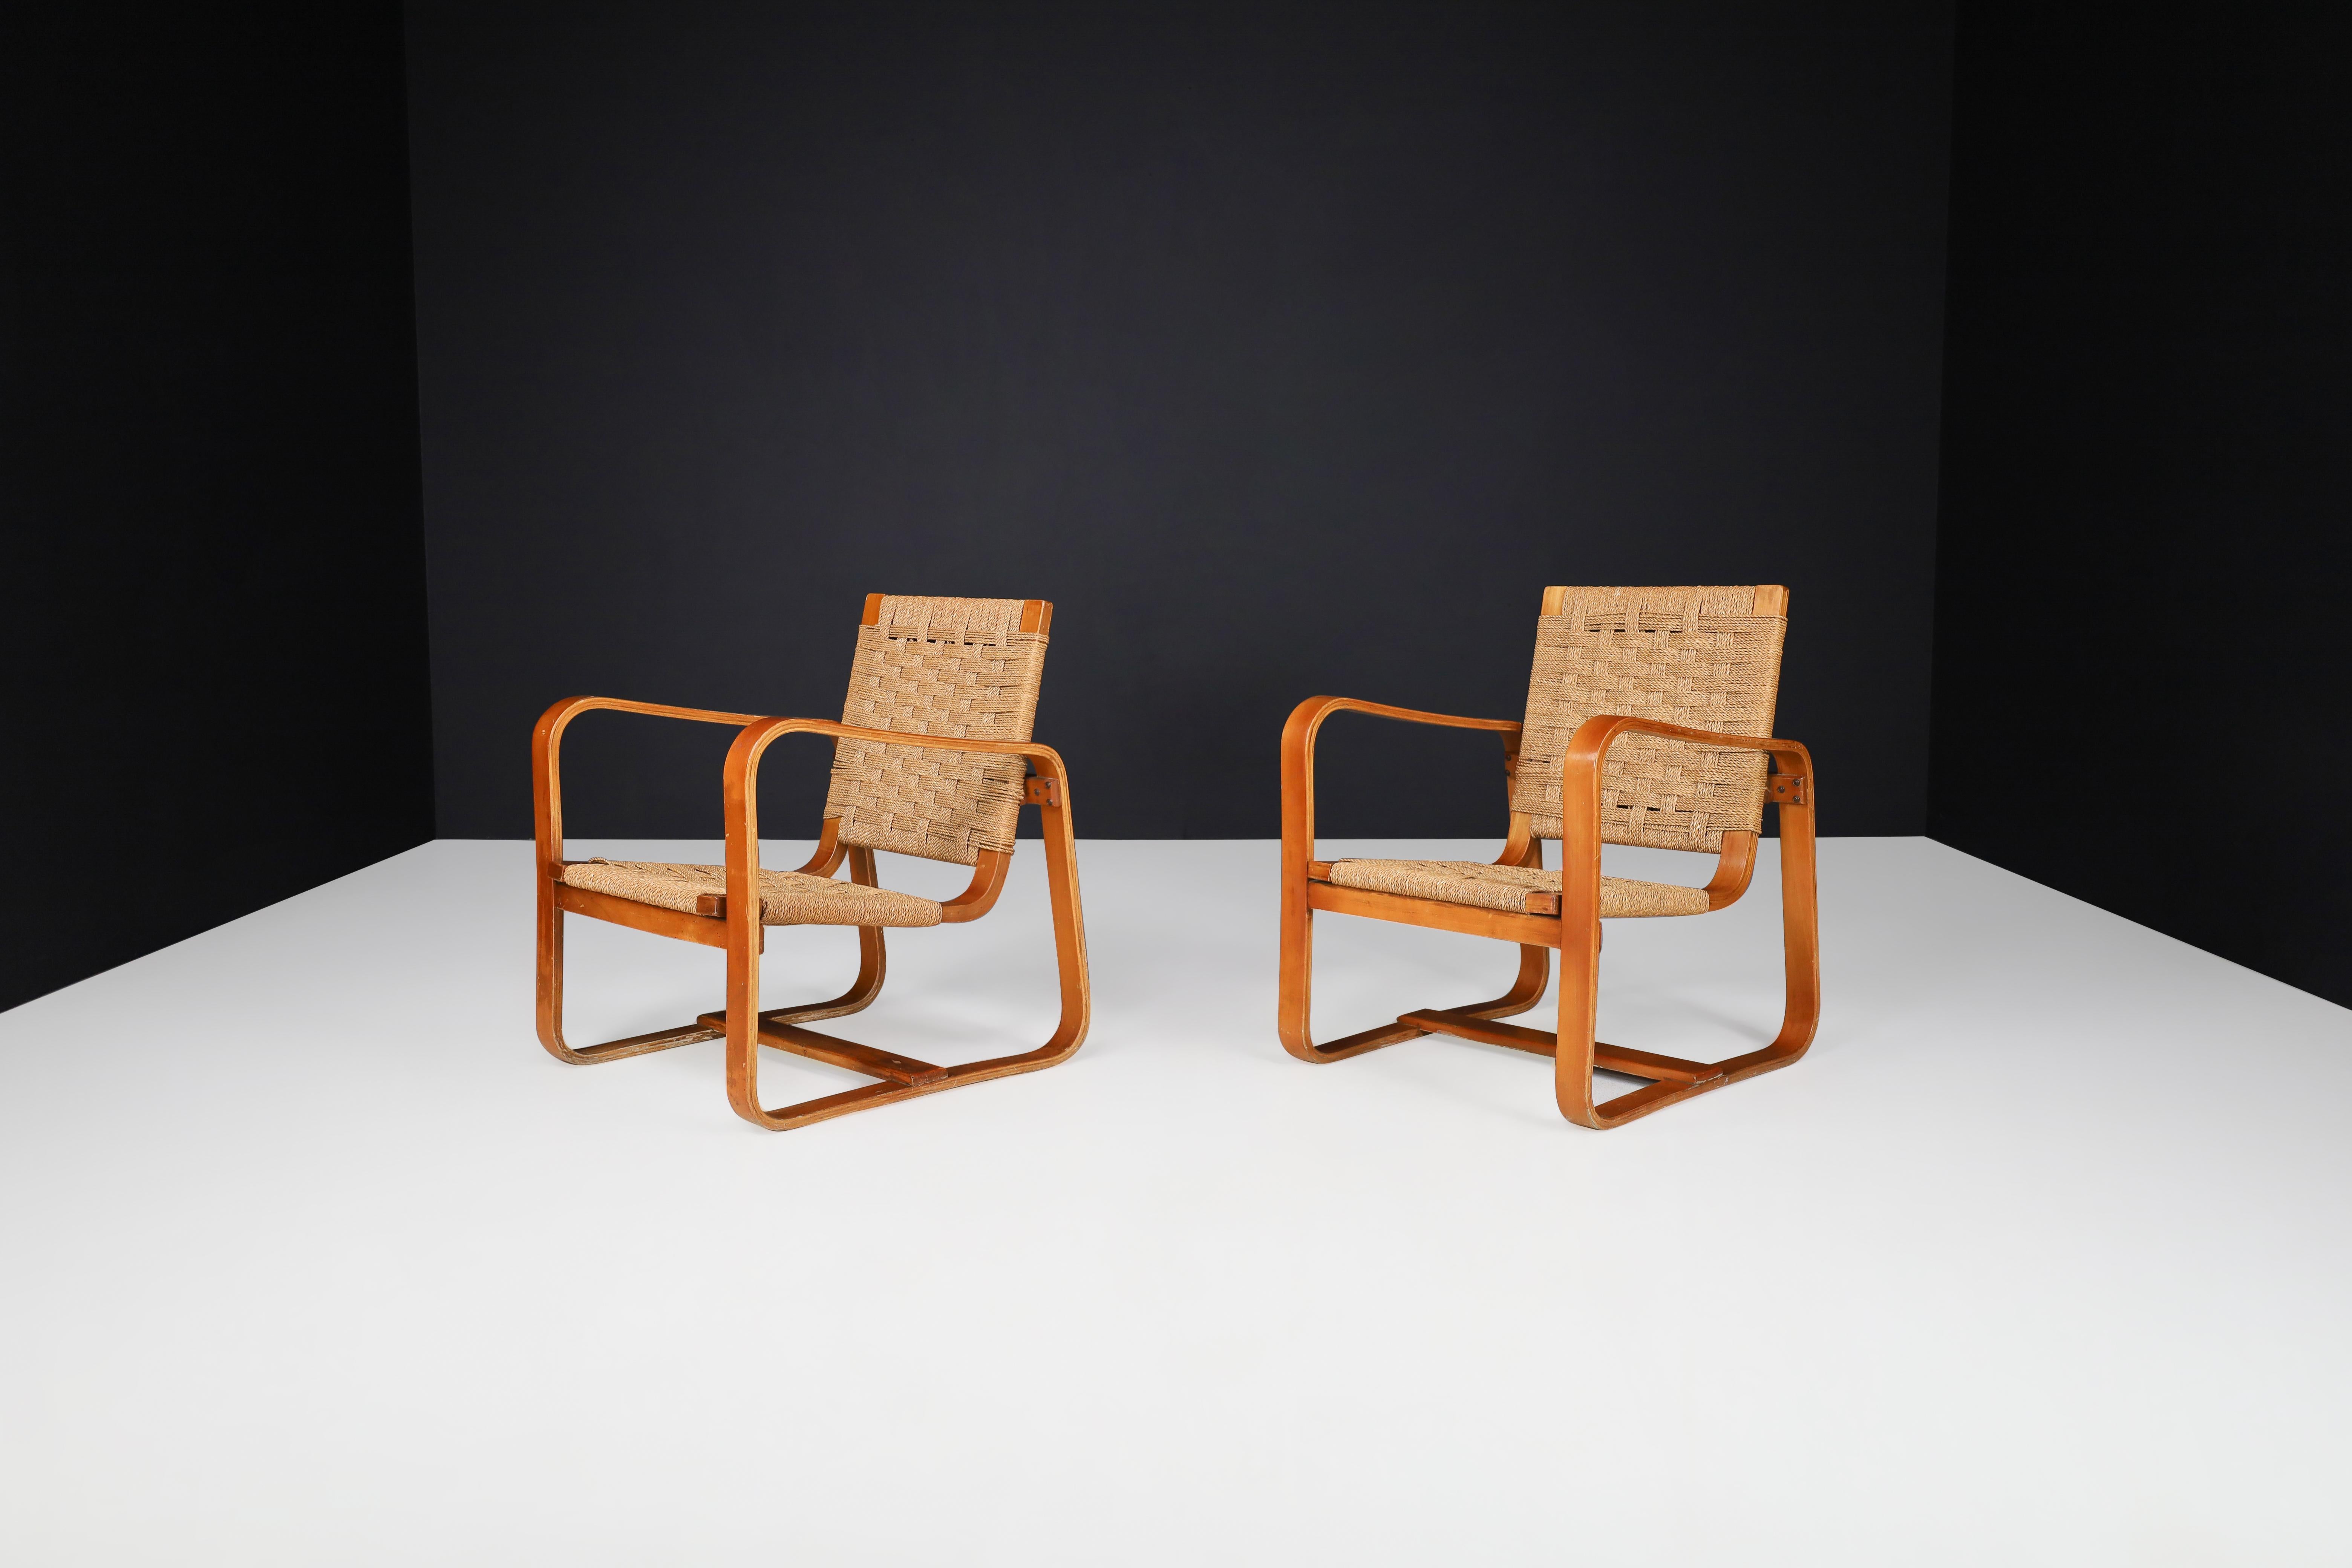 Giuseppe Pagano Pogatschnig. 'Bocconi' Armchairs, Italy, 1940s For Sale 1